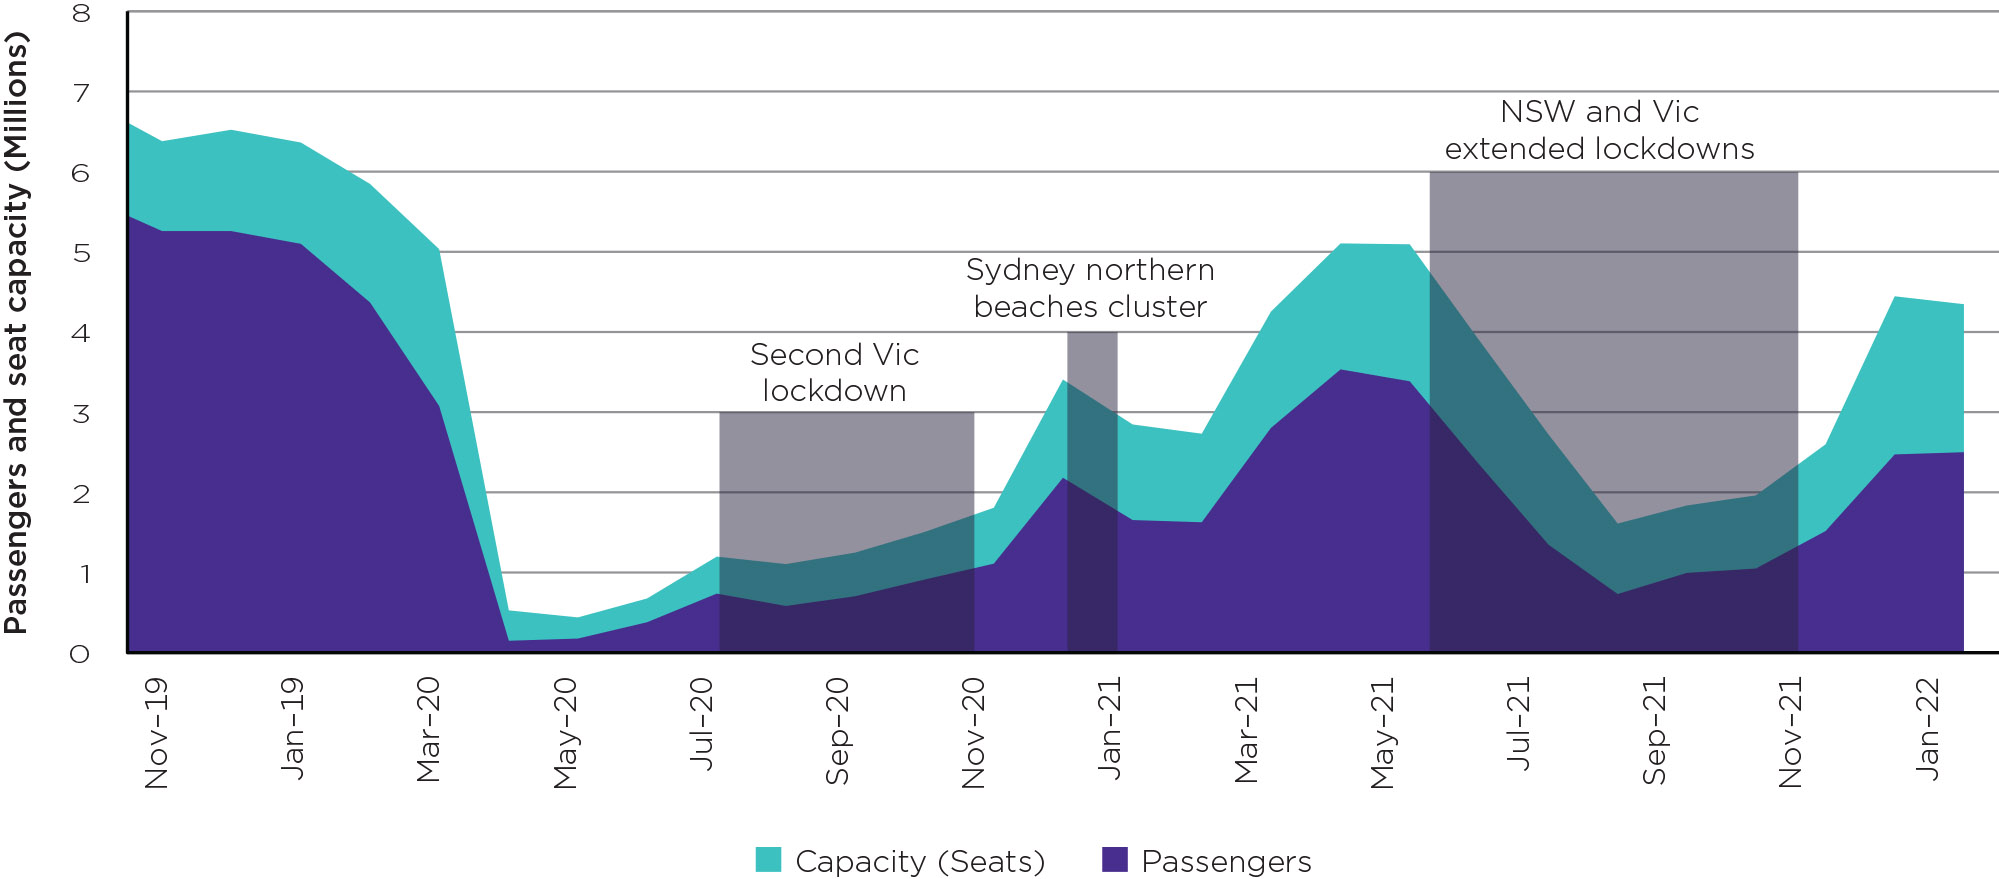 Australia's domestic airline industry has suffered multiple setbacks during the COVID-19 pandemic, but scheduled capacity reached 95 per cent of pre-pandemic levels in the week of Christmas 2021.